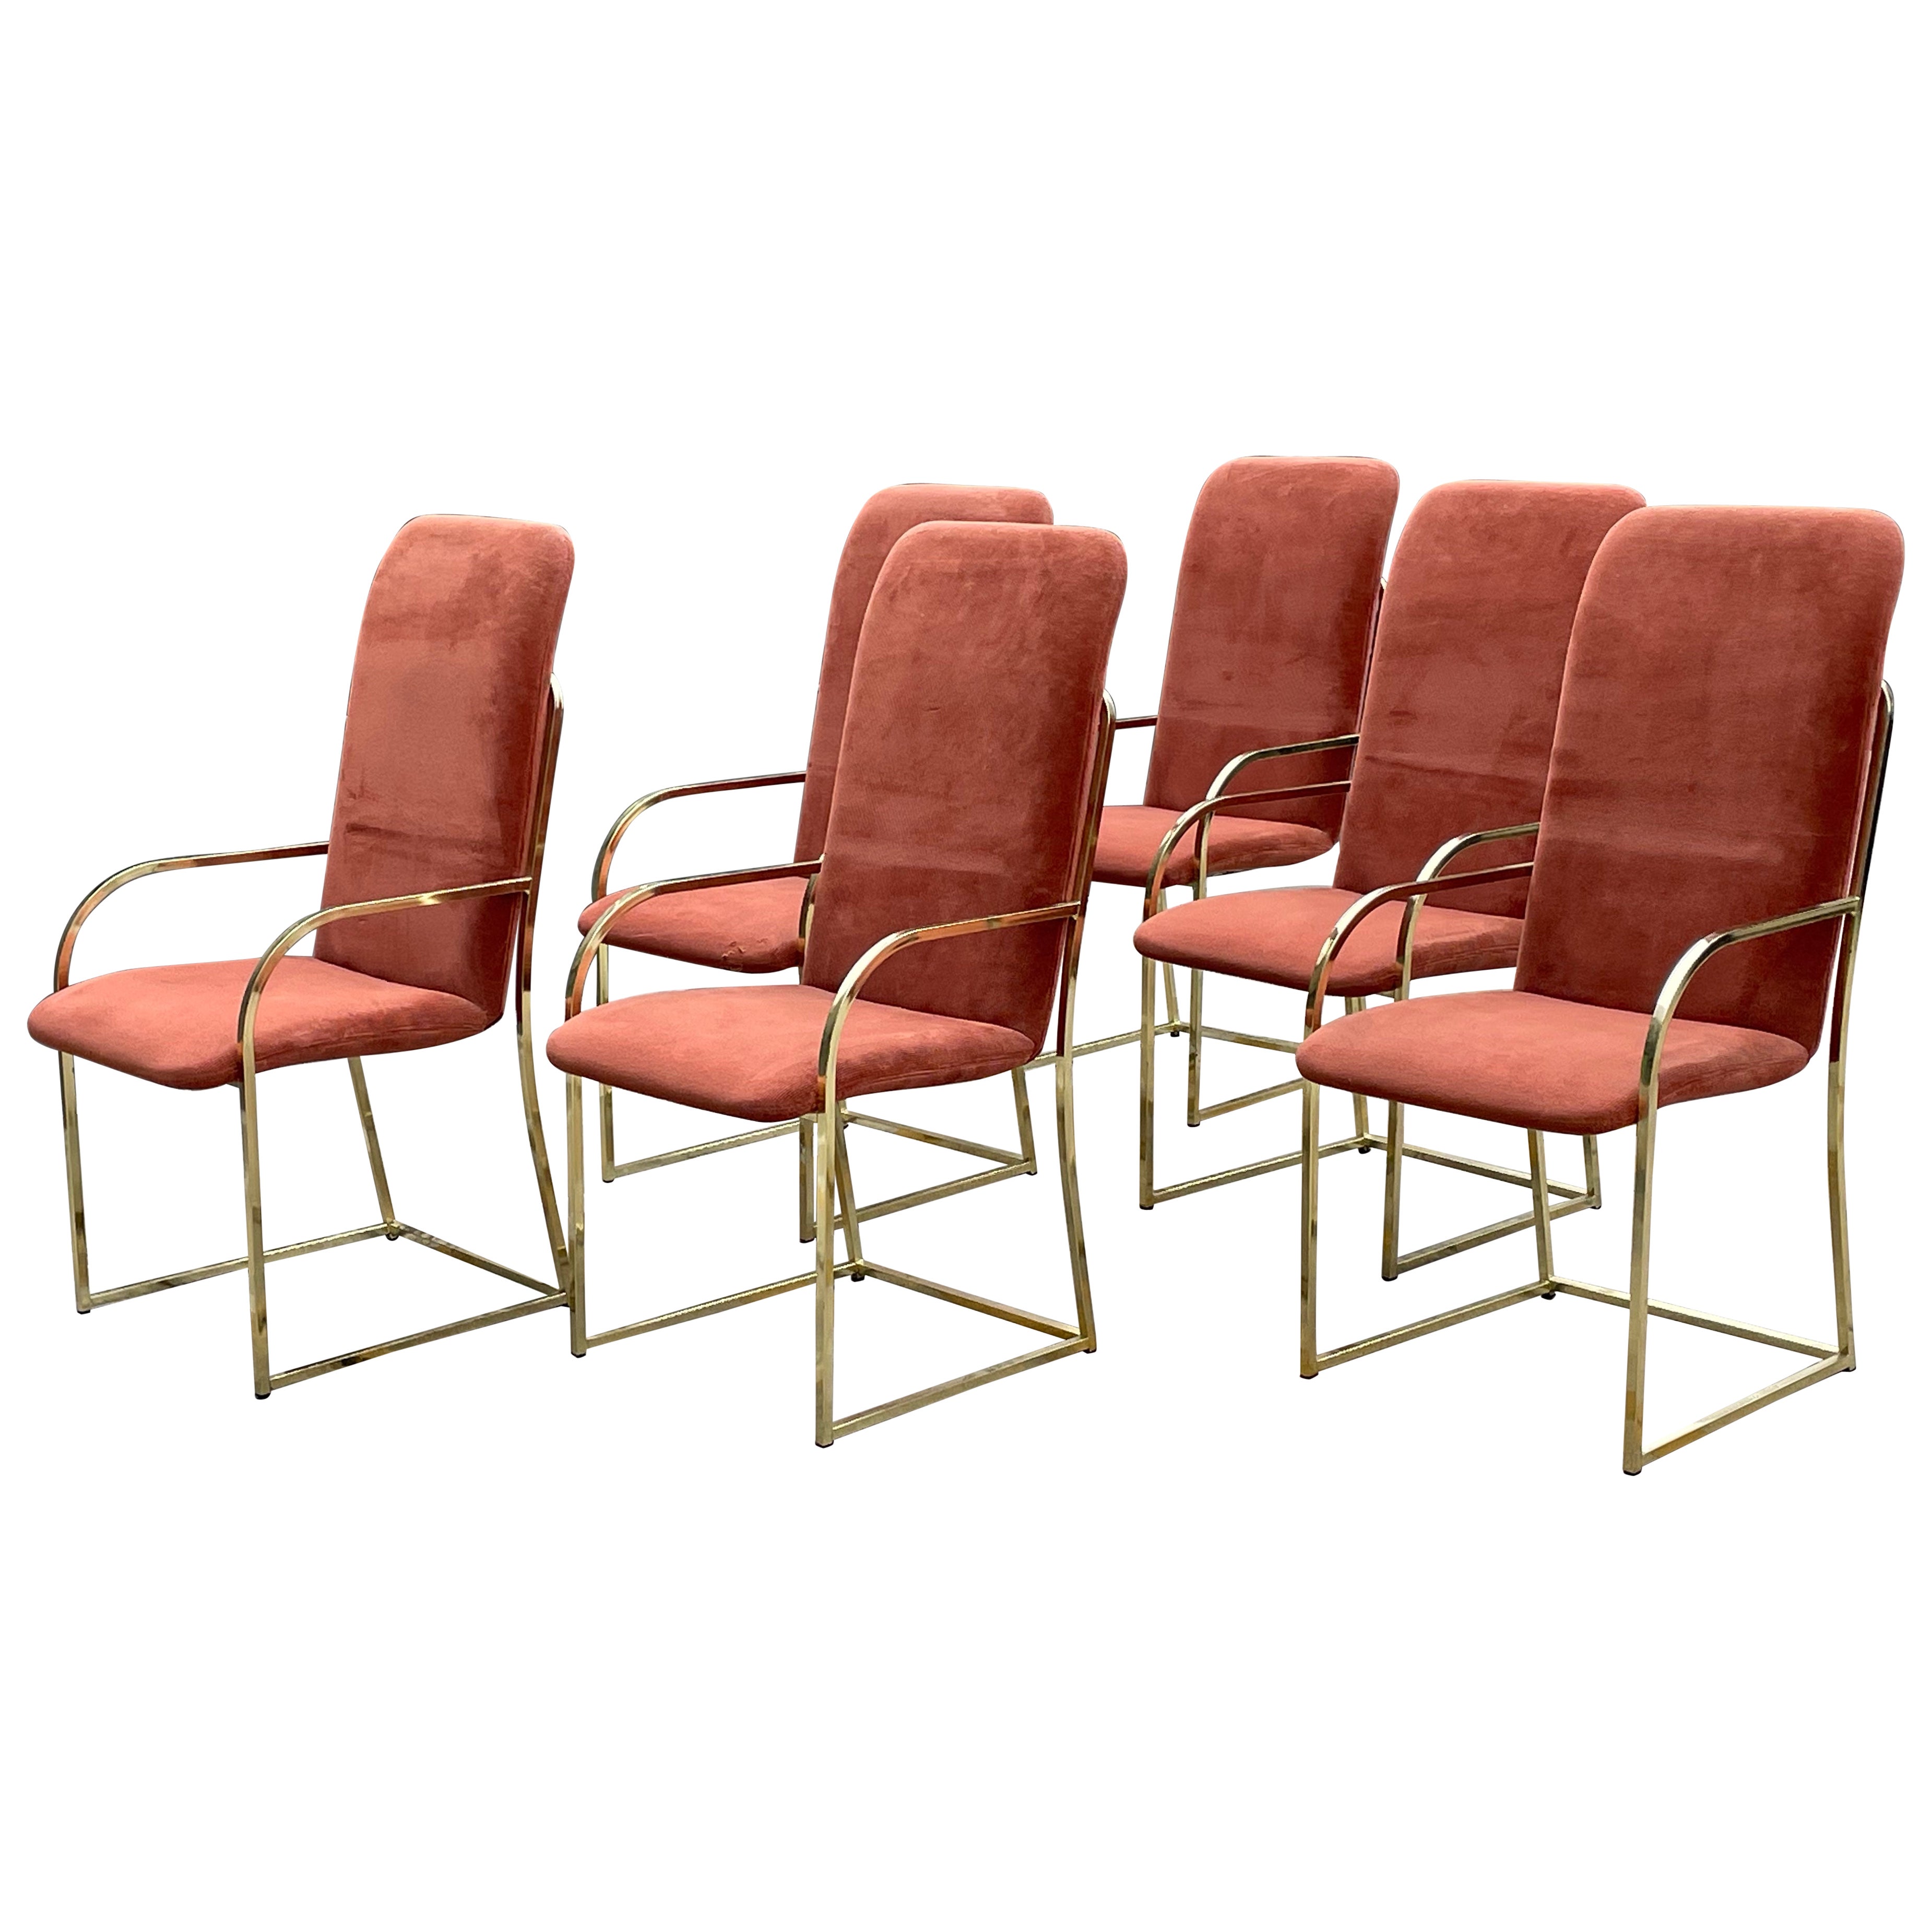 Set of (6) Vintage Mid Century 60's Milo Baughman Brass Dining Chairs for DIA Design Institute of America.

Good vintage condition. Most chairs are SIGNED with DIA label. One is tagged by metal plate, and three of the others are tagged under each